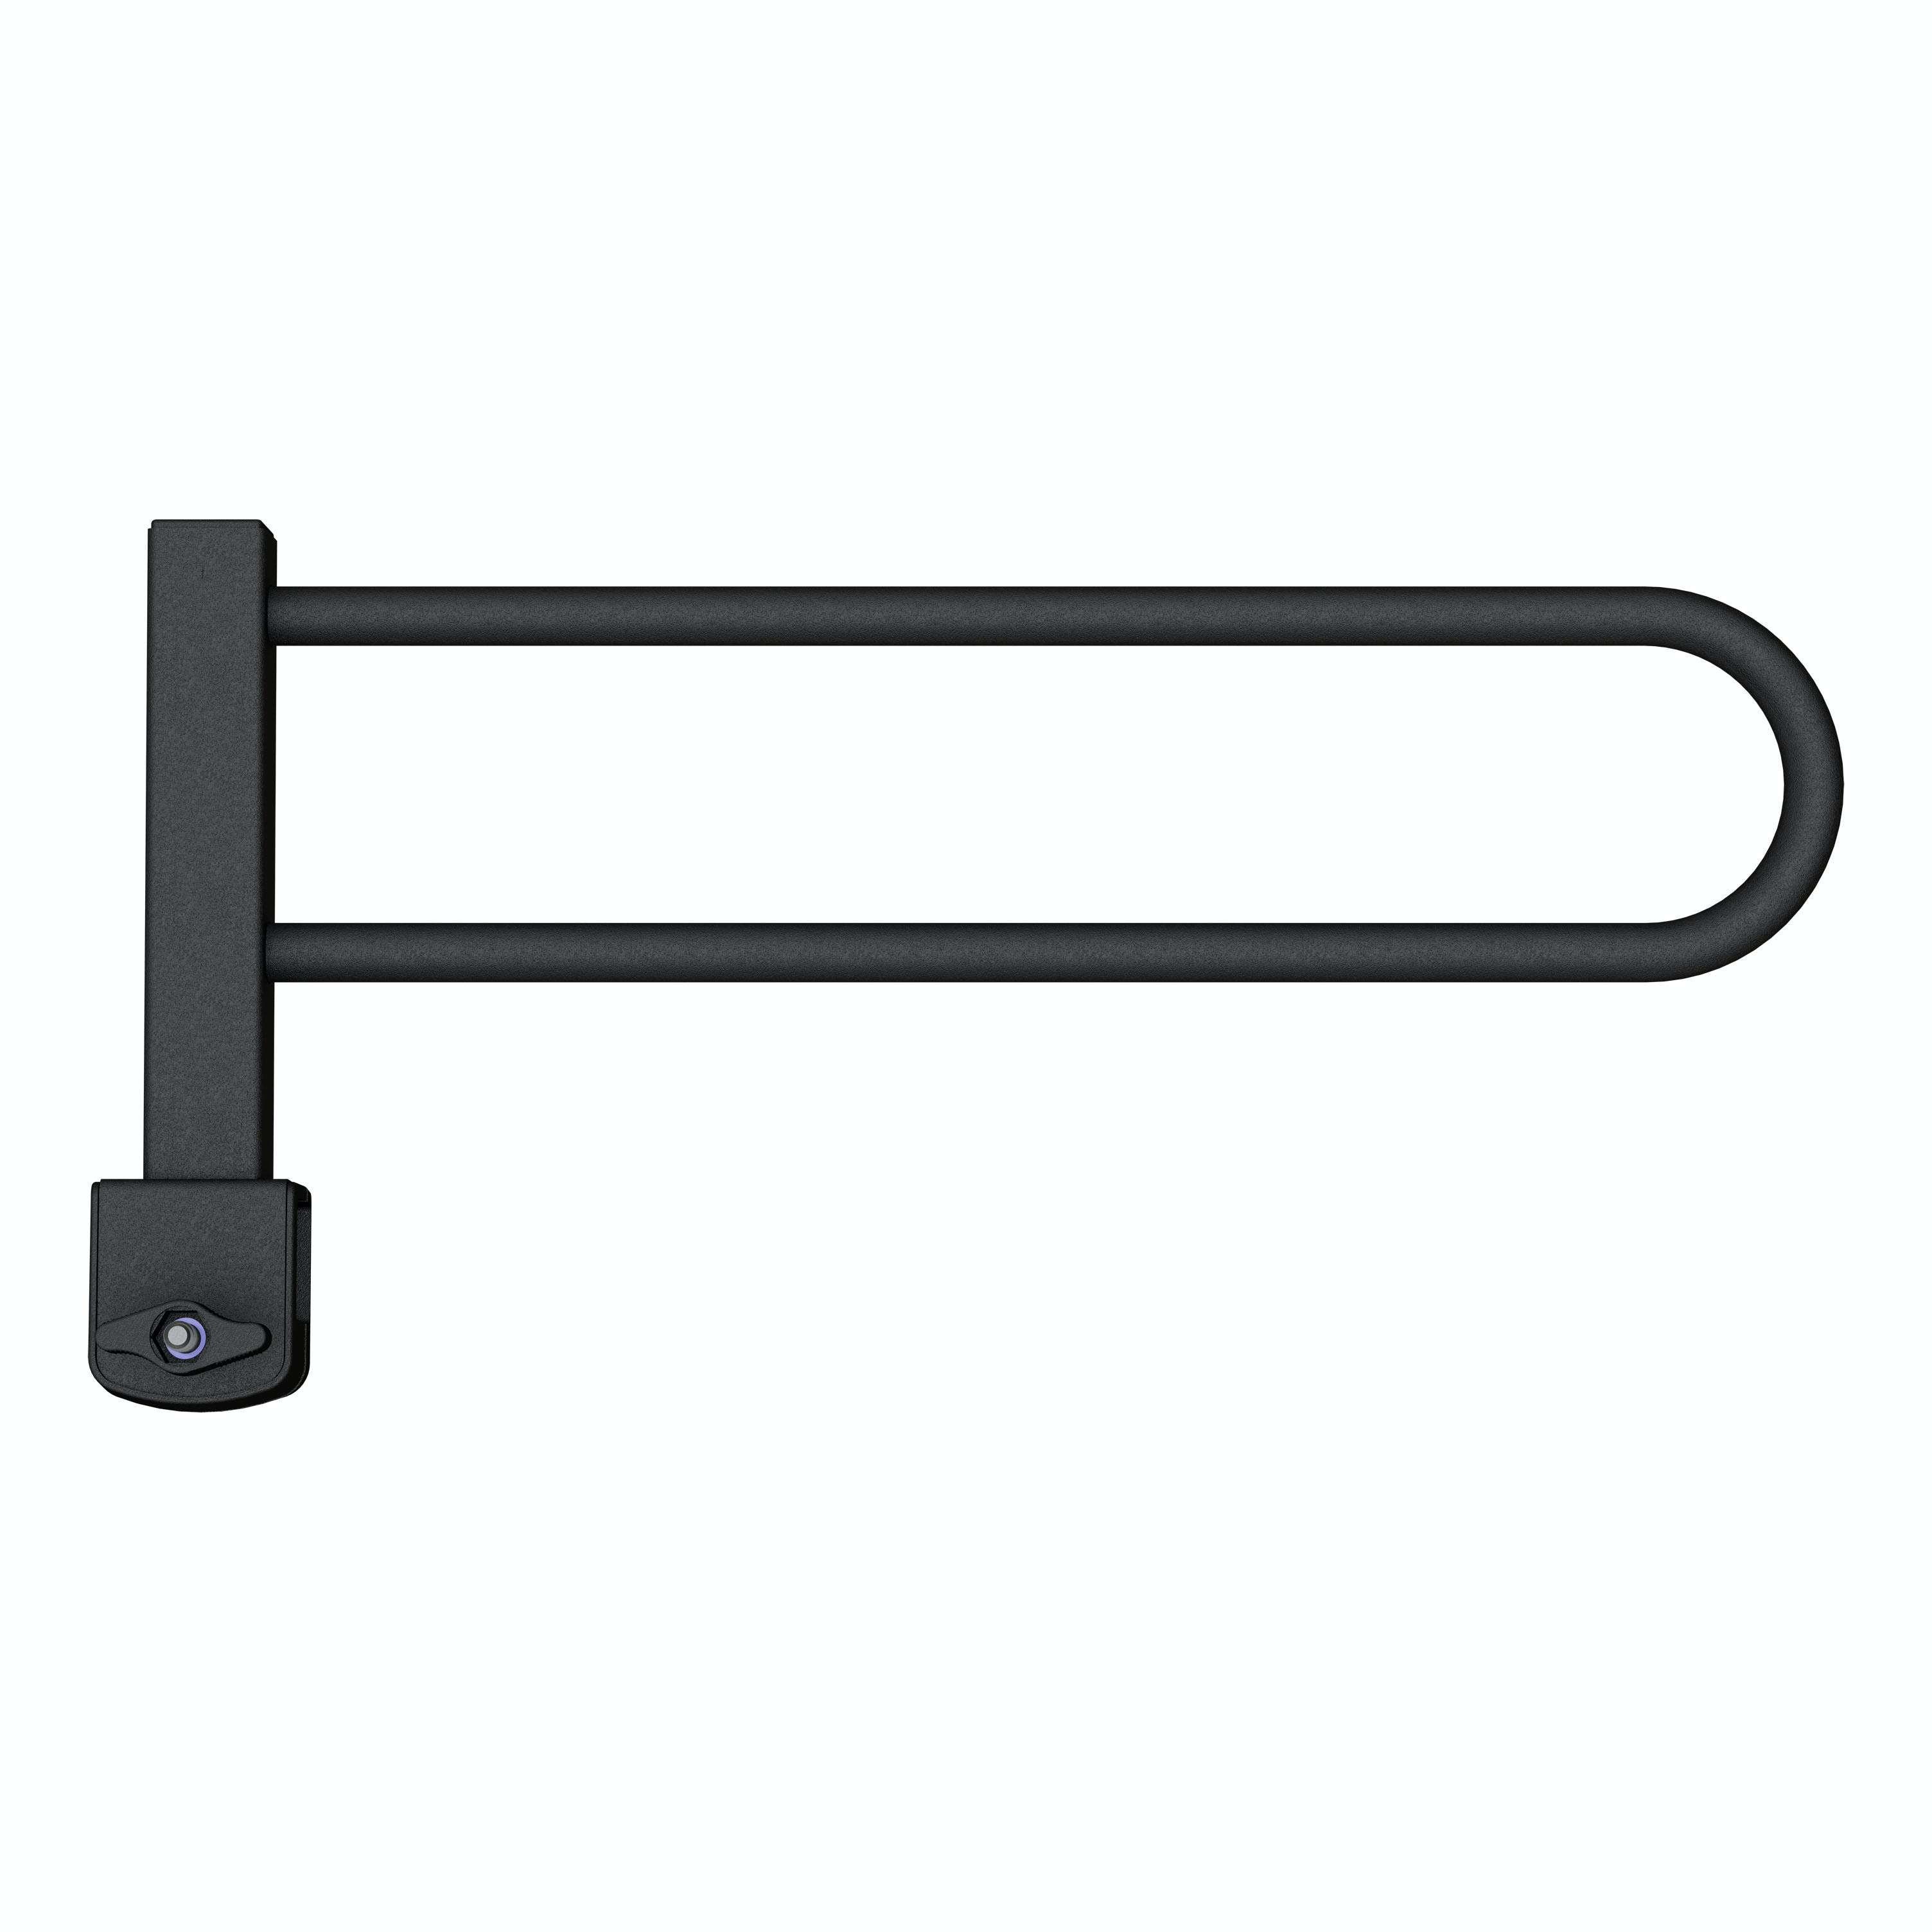 CURT 19241 Replacement Tray-Style Bike Rack Cradle - Left